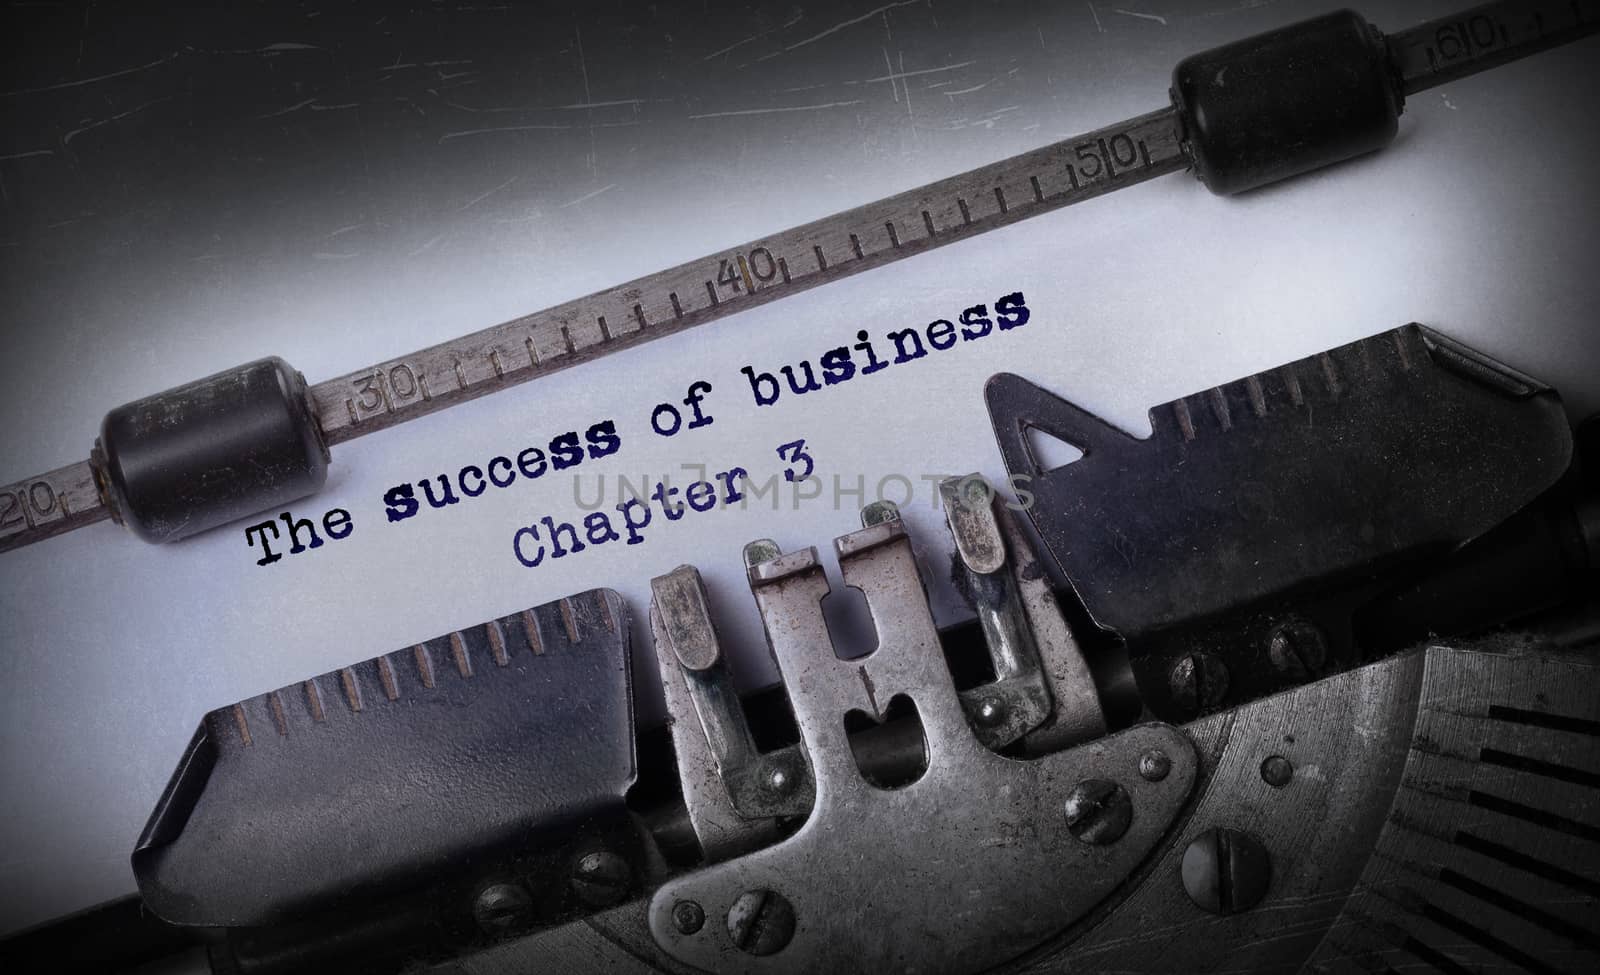 Vintage inscription made by old typewriter, The success of business, chapter 3